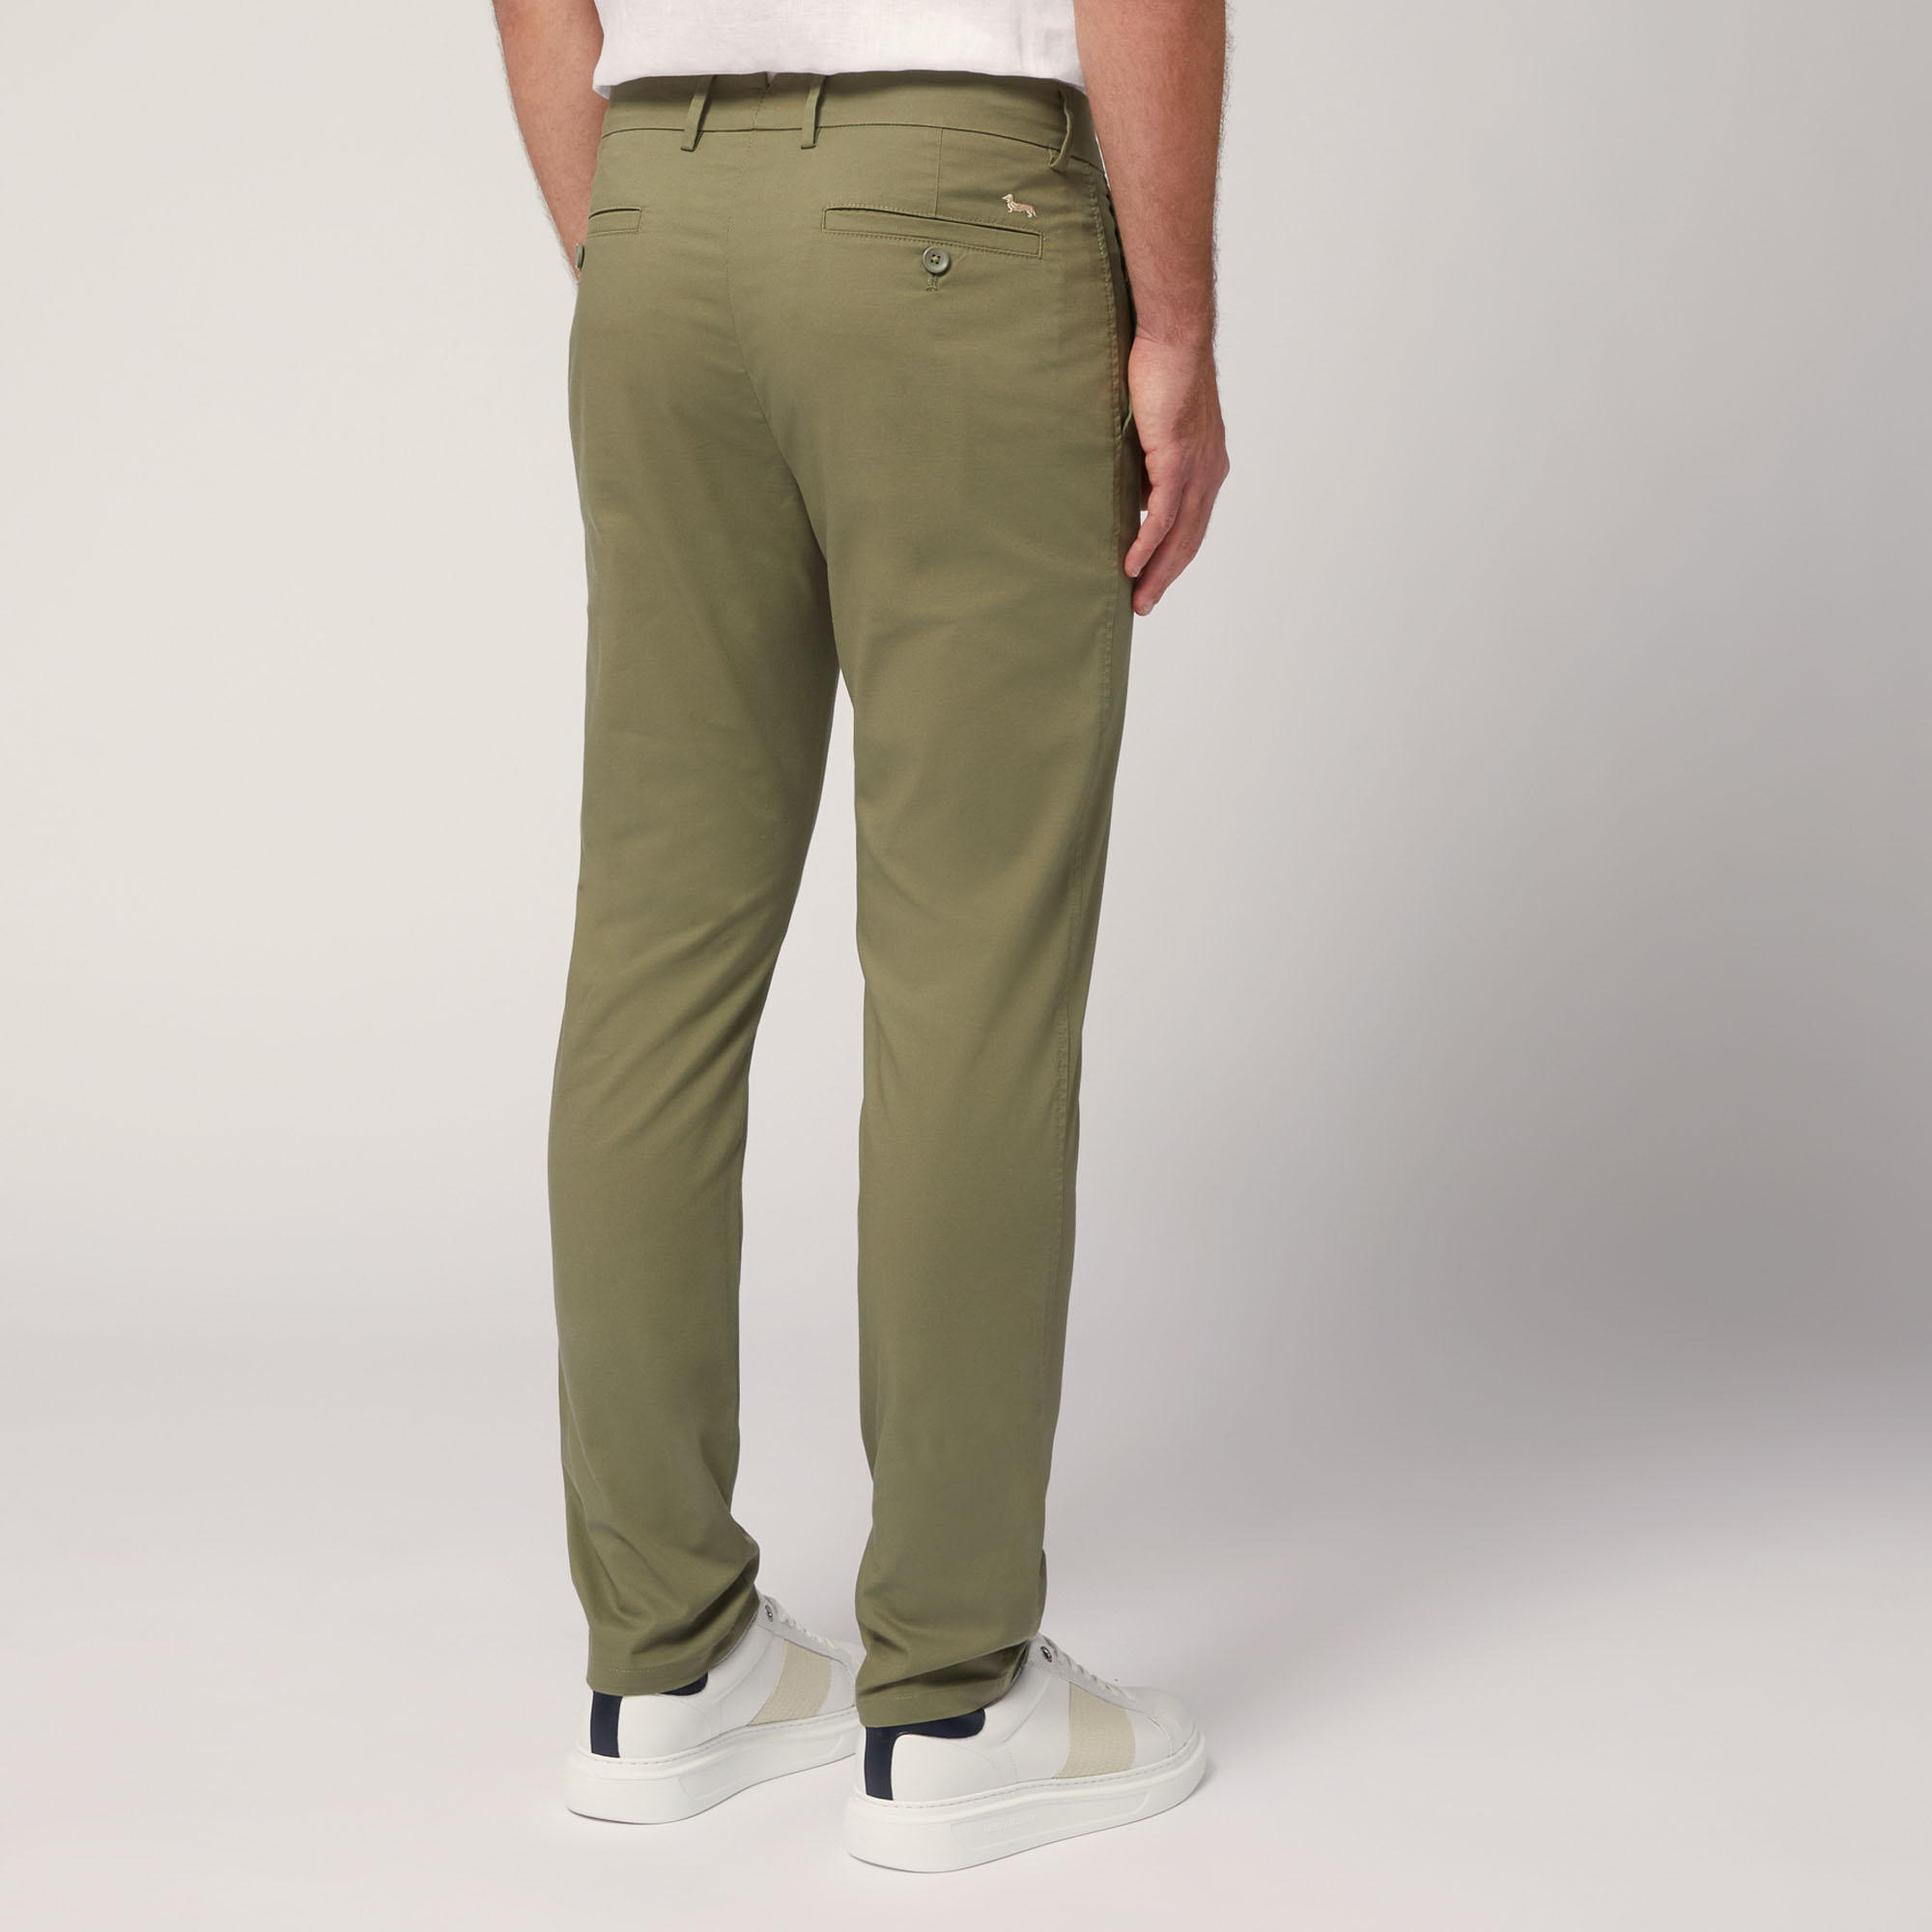 Narrow Fit Chino Pants, Green, large image number 1